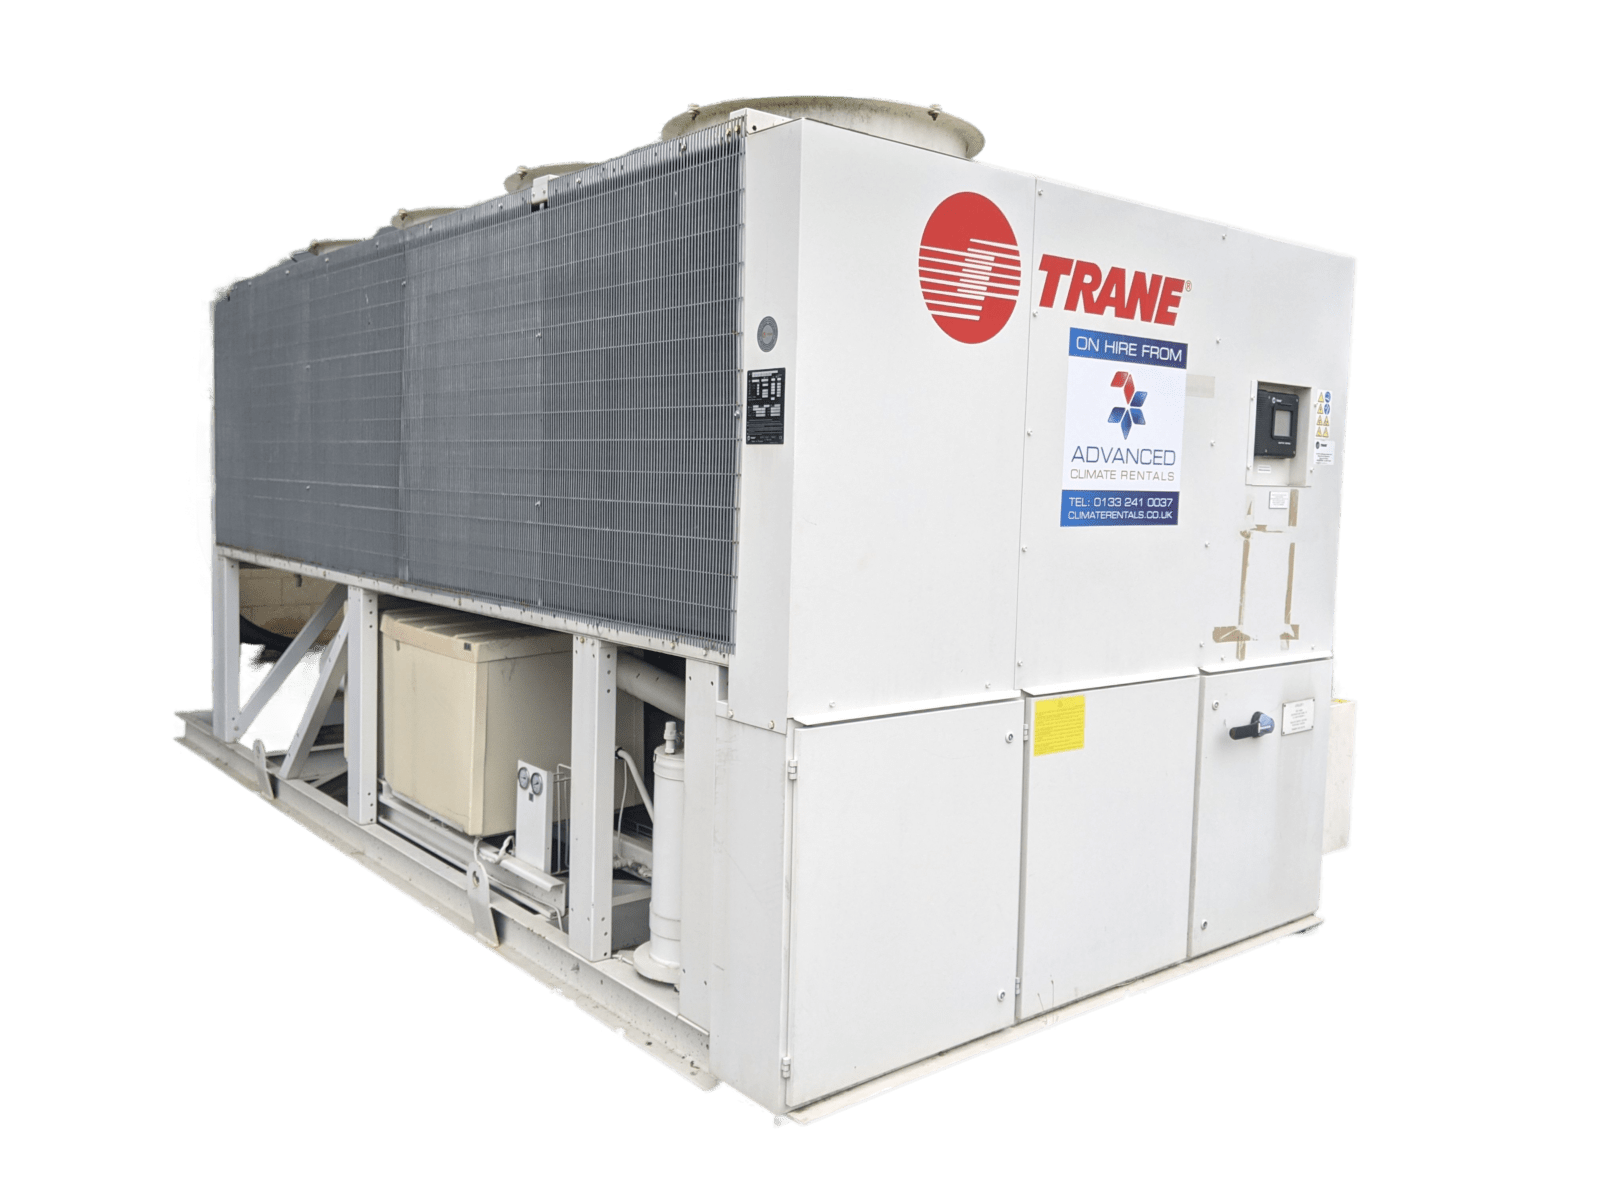 Portable 400kw chillers. Packaged for easy movement